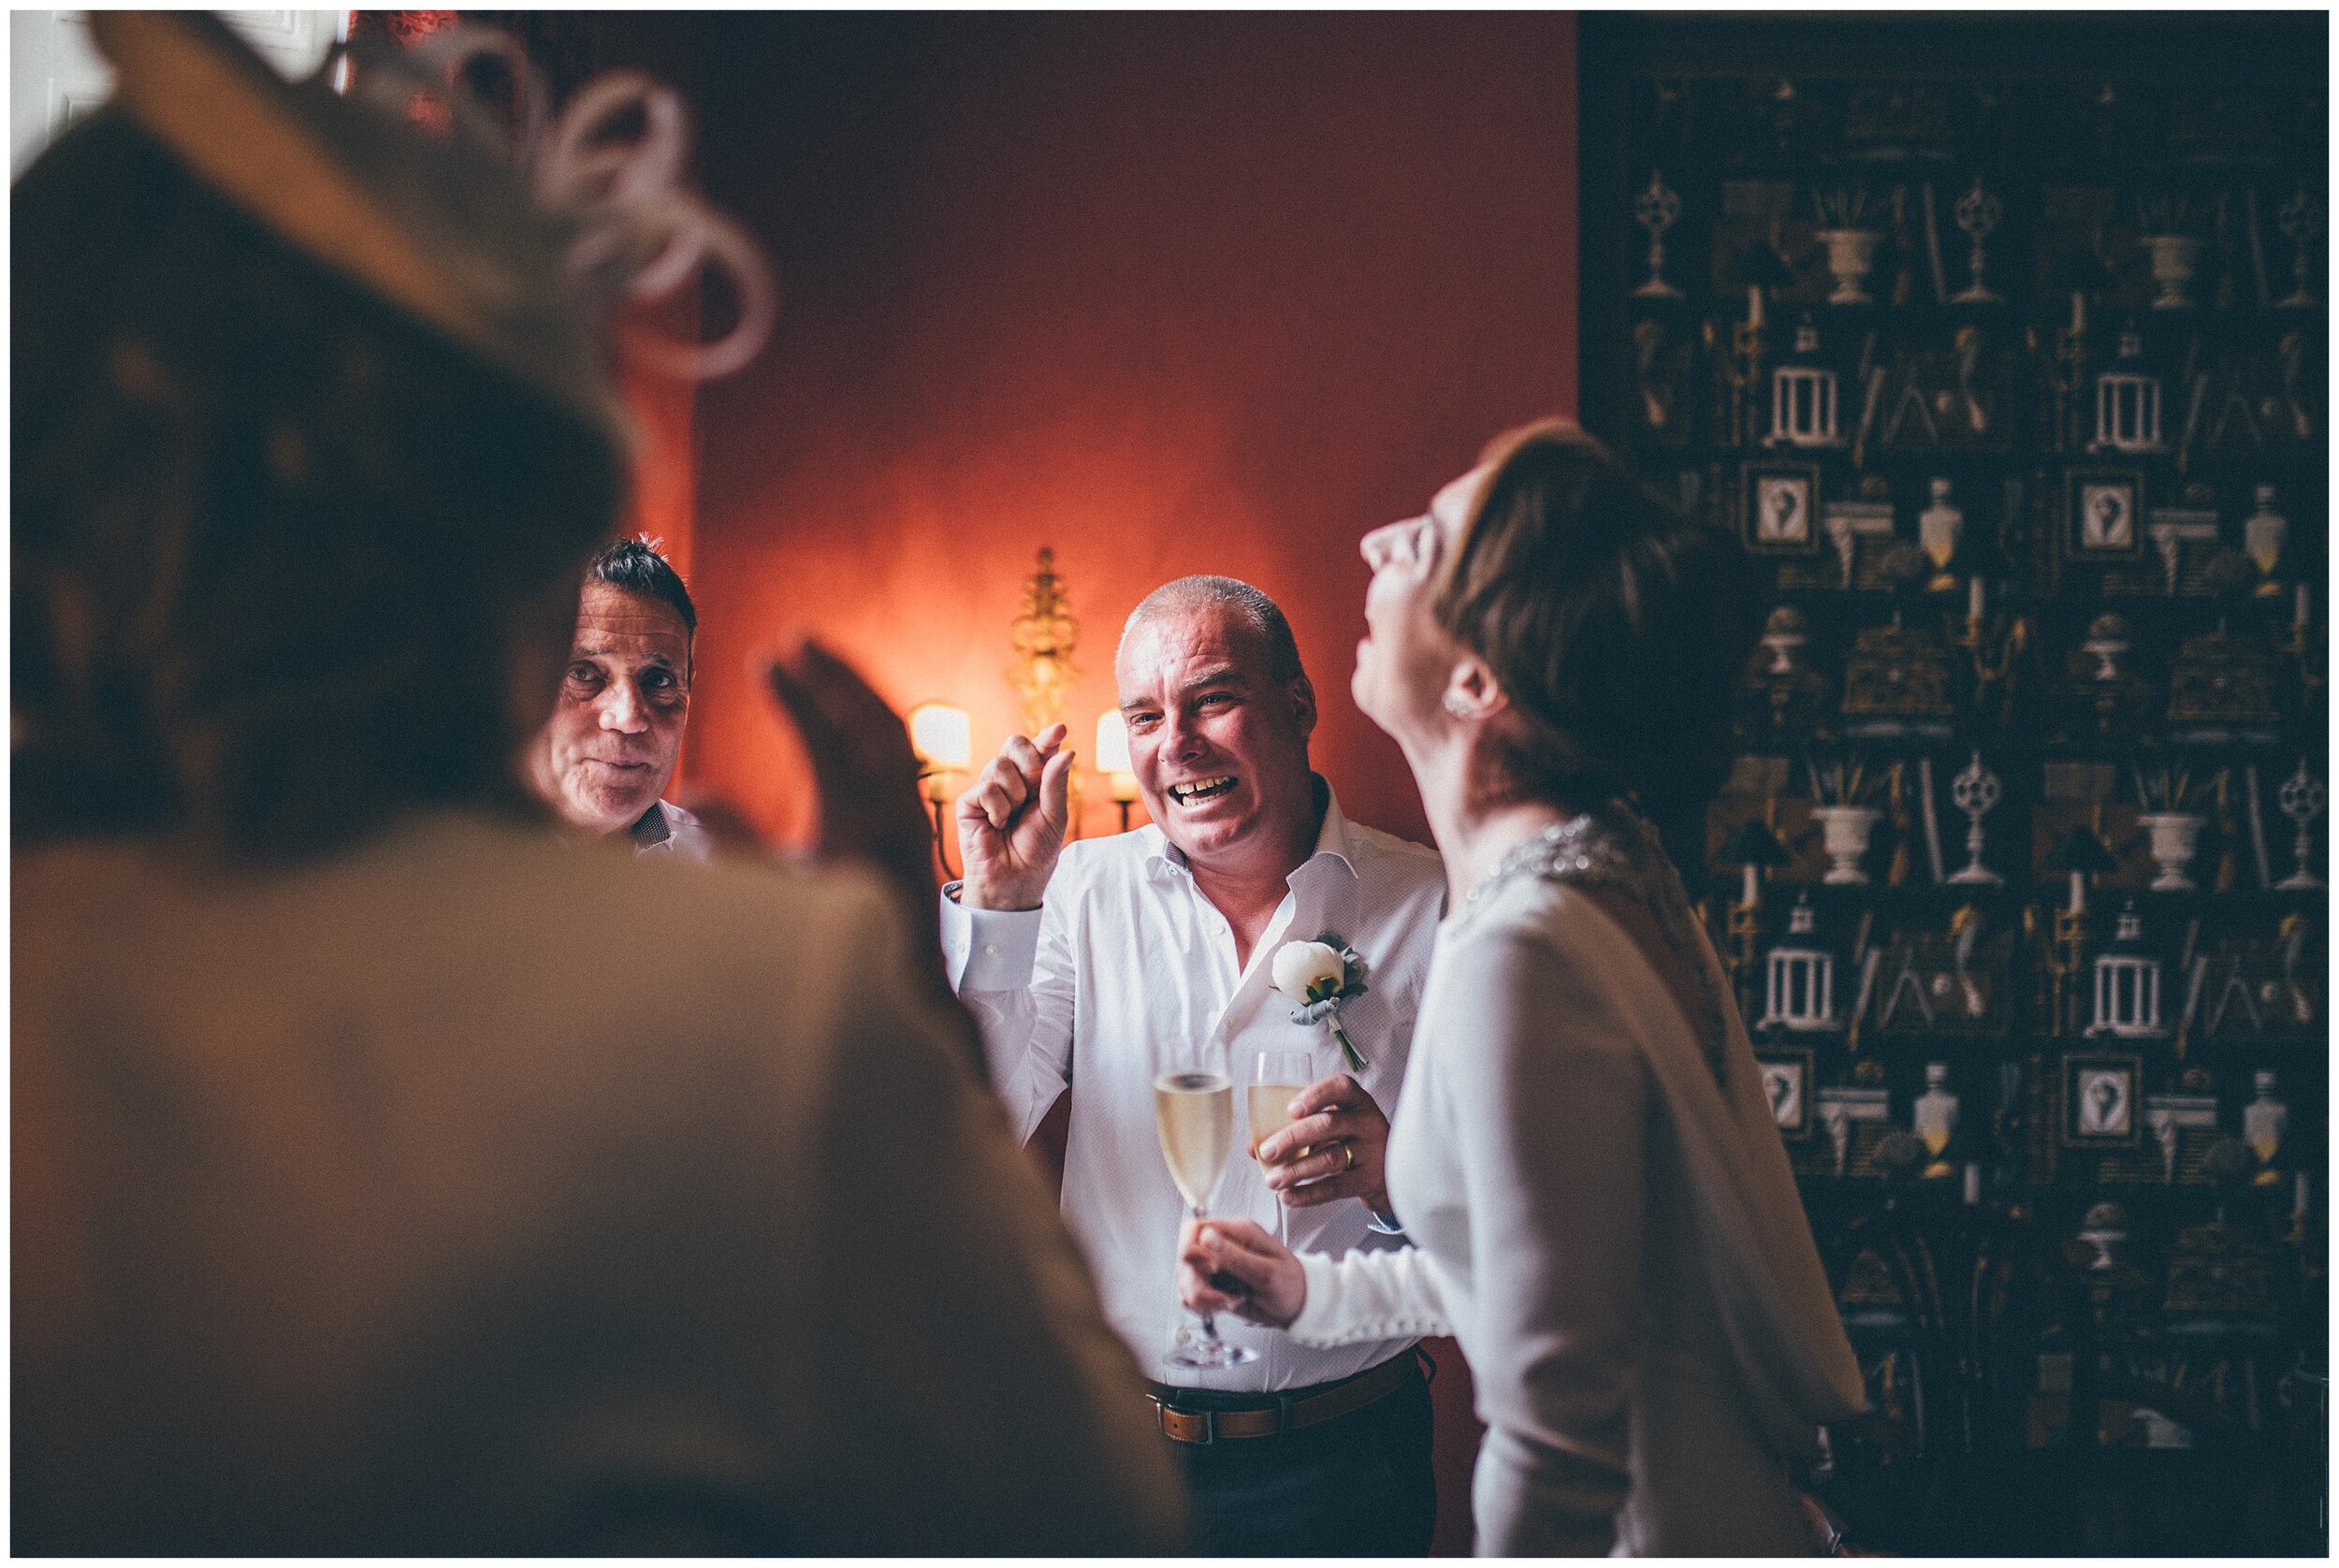 Silverholme Manor wedding photographed by Cheshire wedding photographer in the Lake District.